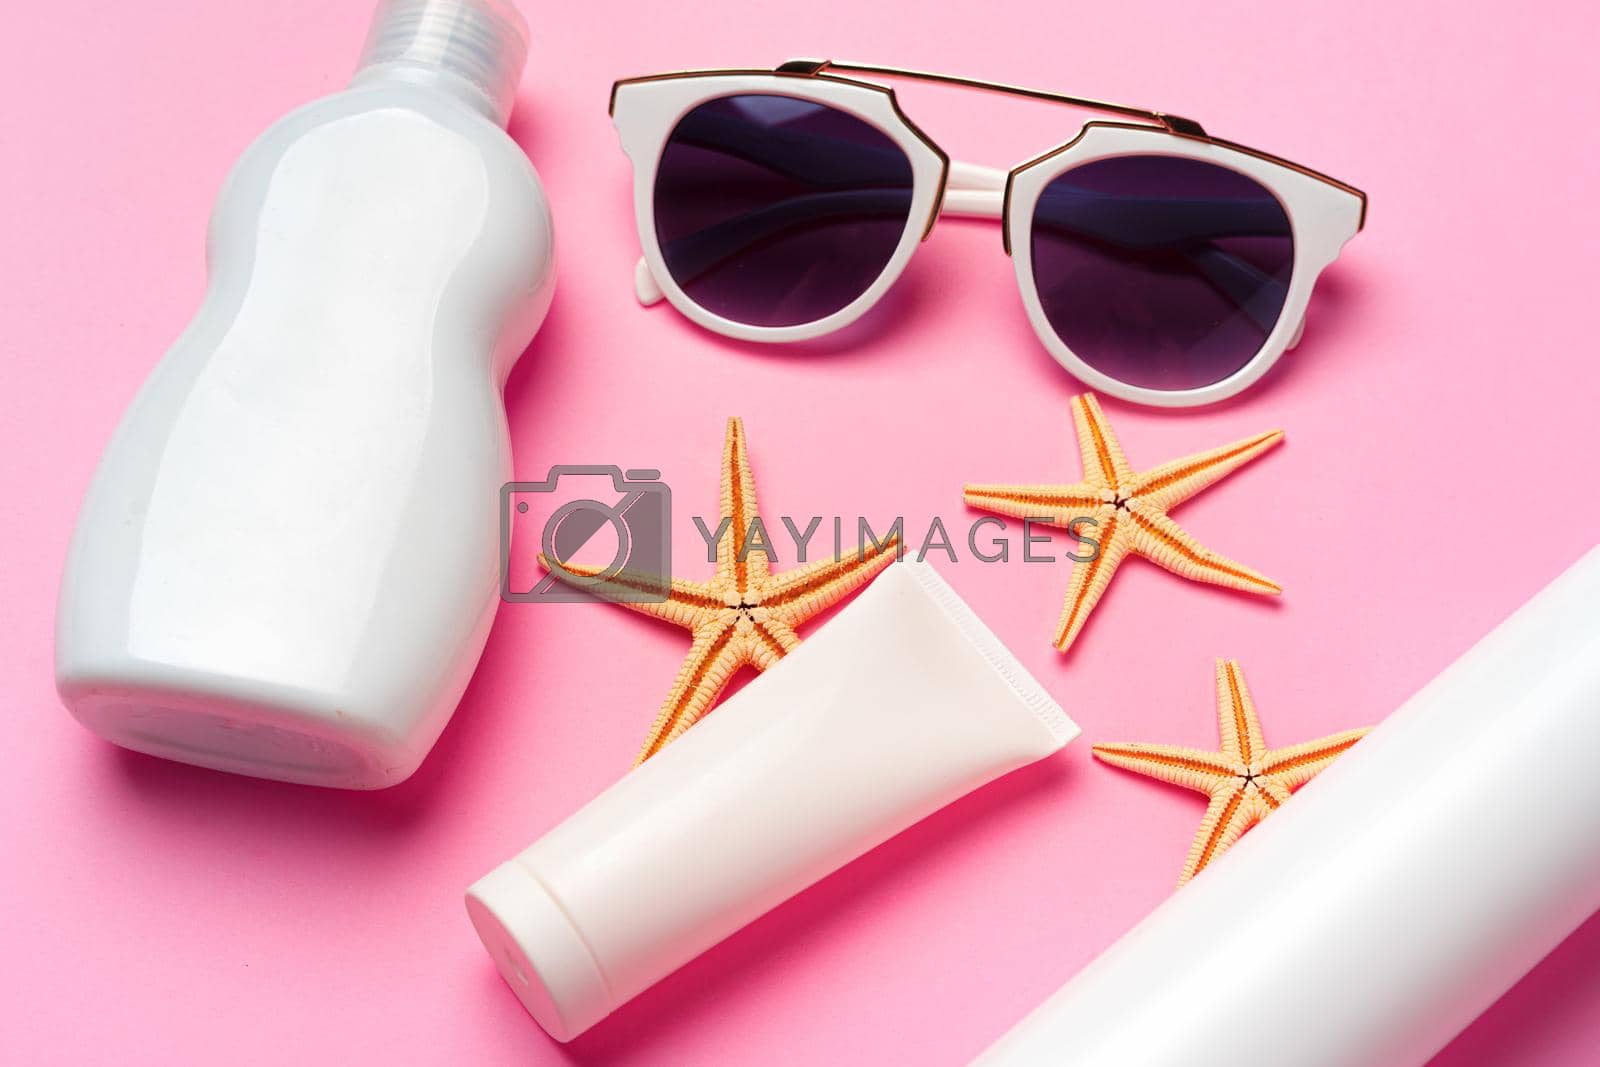 Royalty free image of Sunglasses and sunblock cream close up on paper background by Fabrikasimf